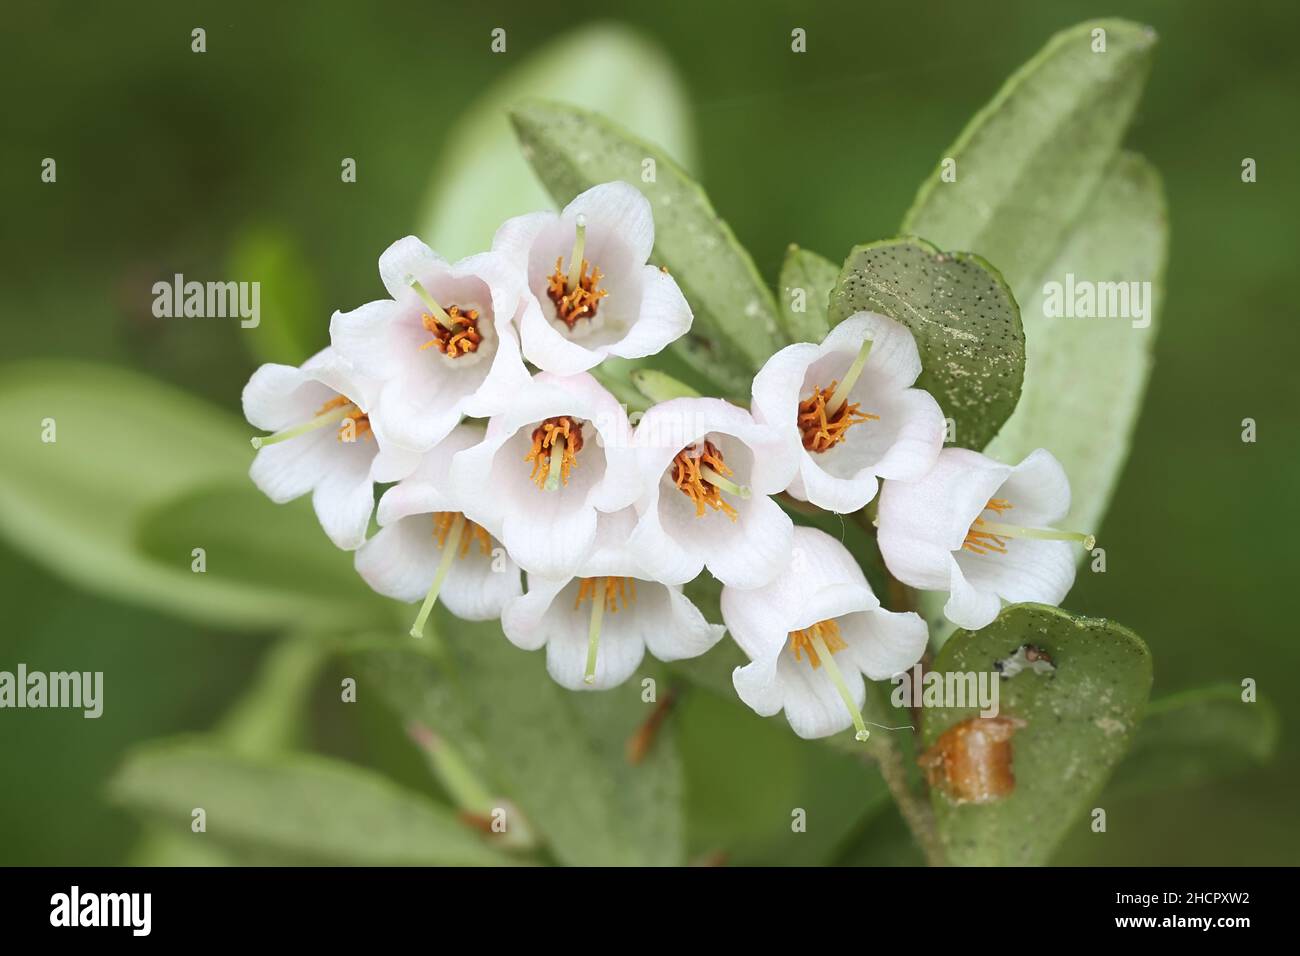 Vaccinium vitis-idaea, flowers of cowberry, edible wild berry plant from Finland Stock Photo